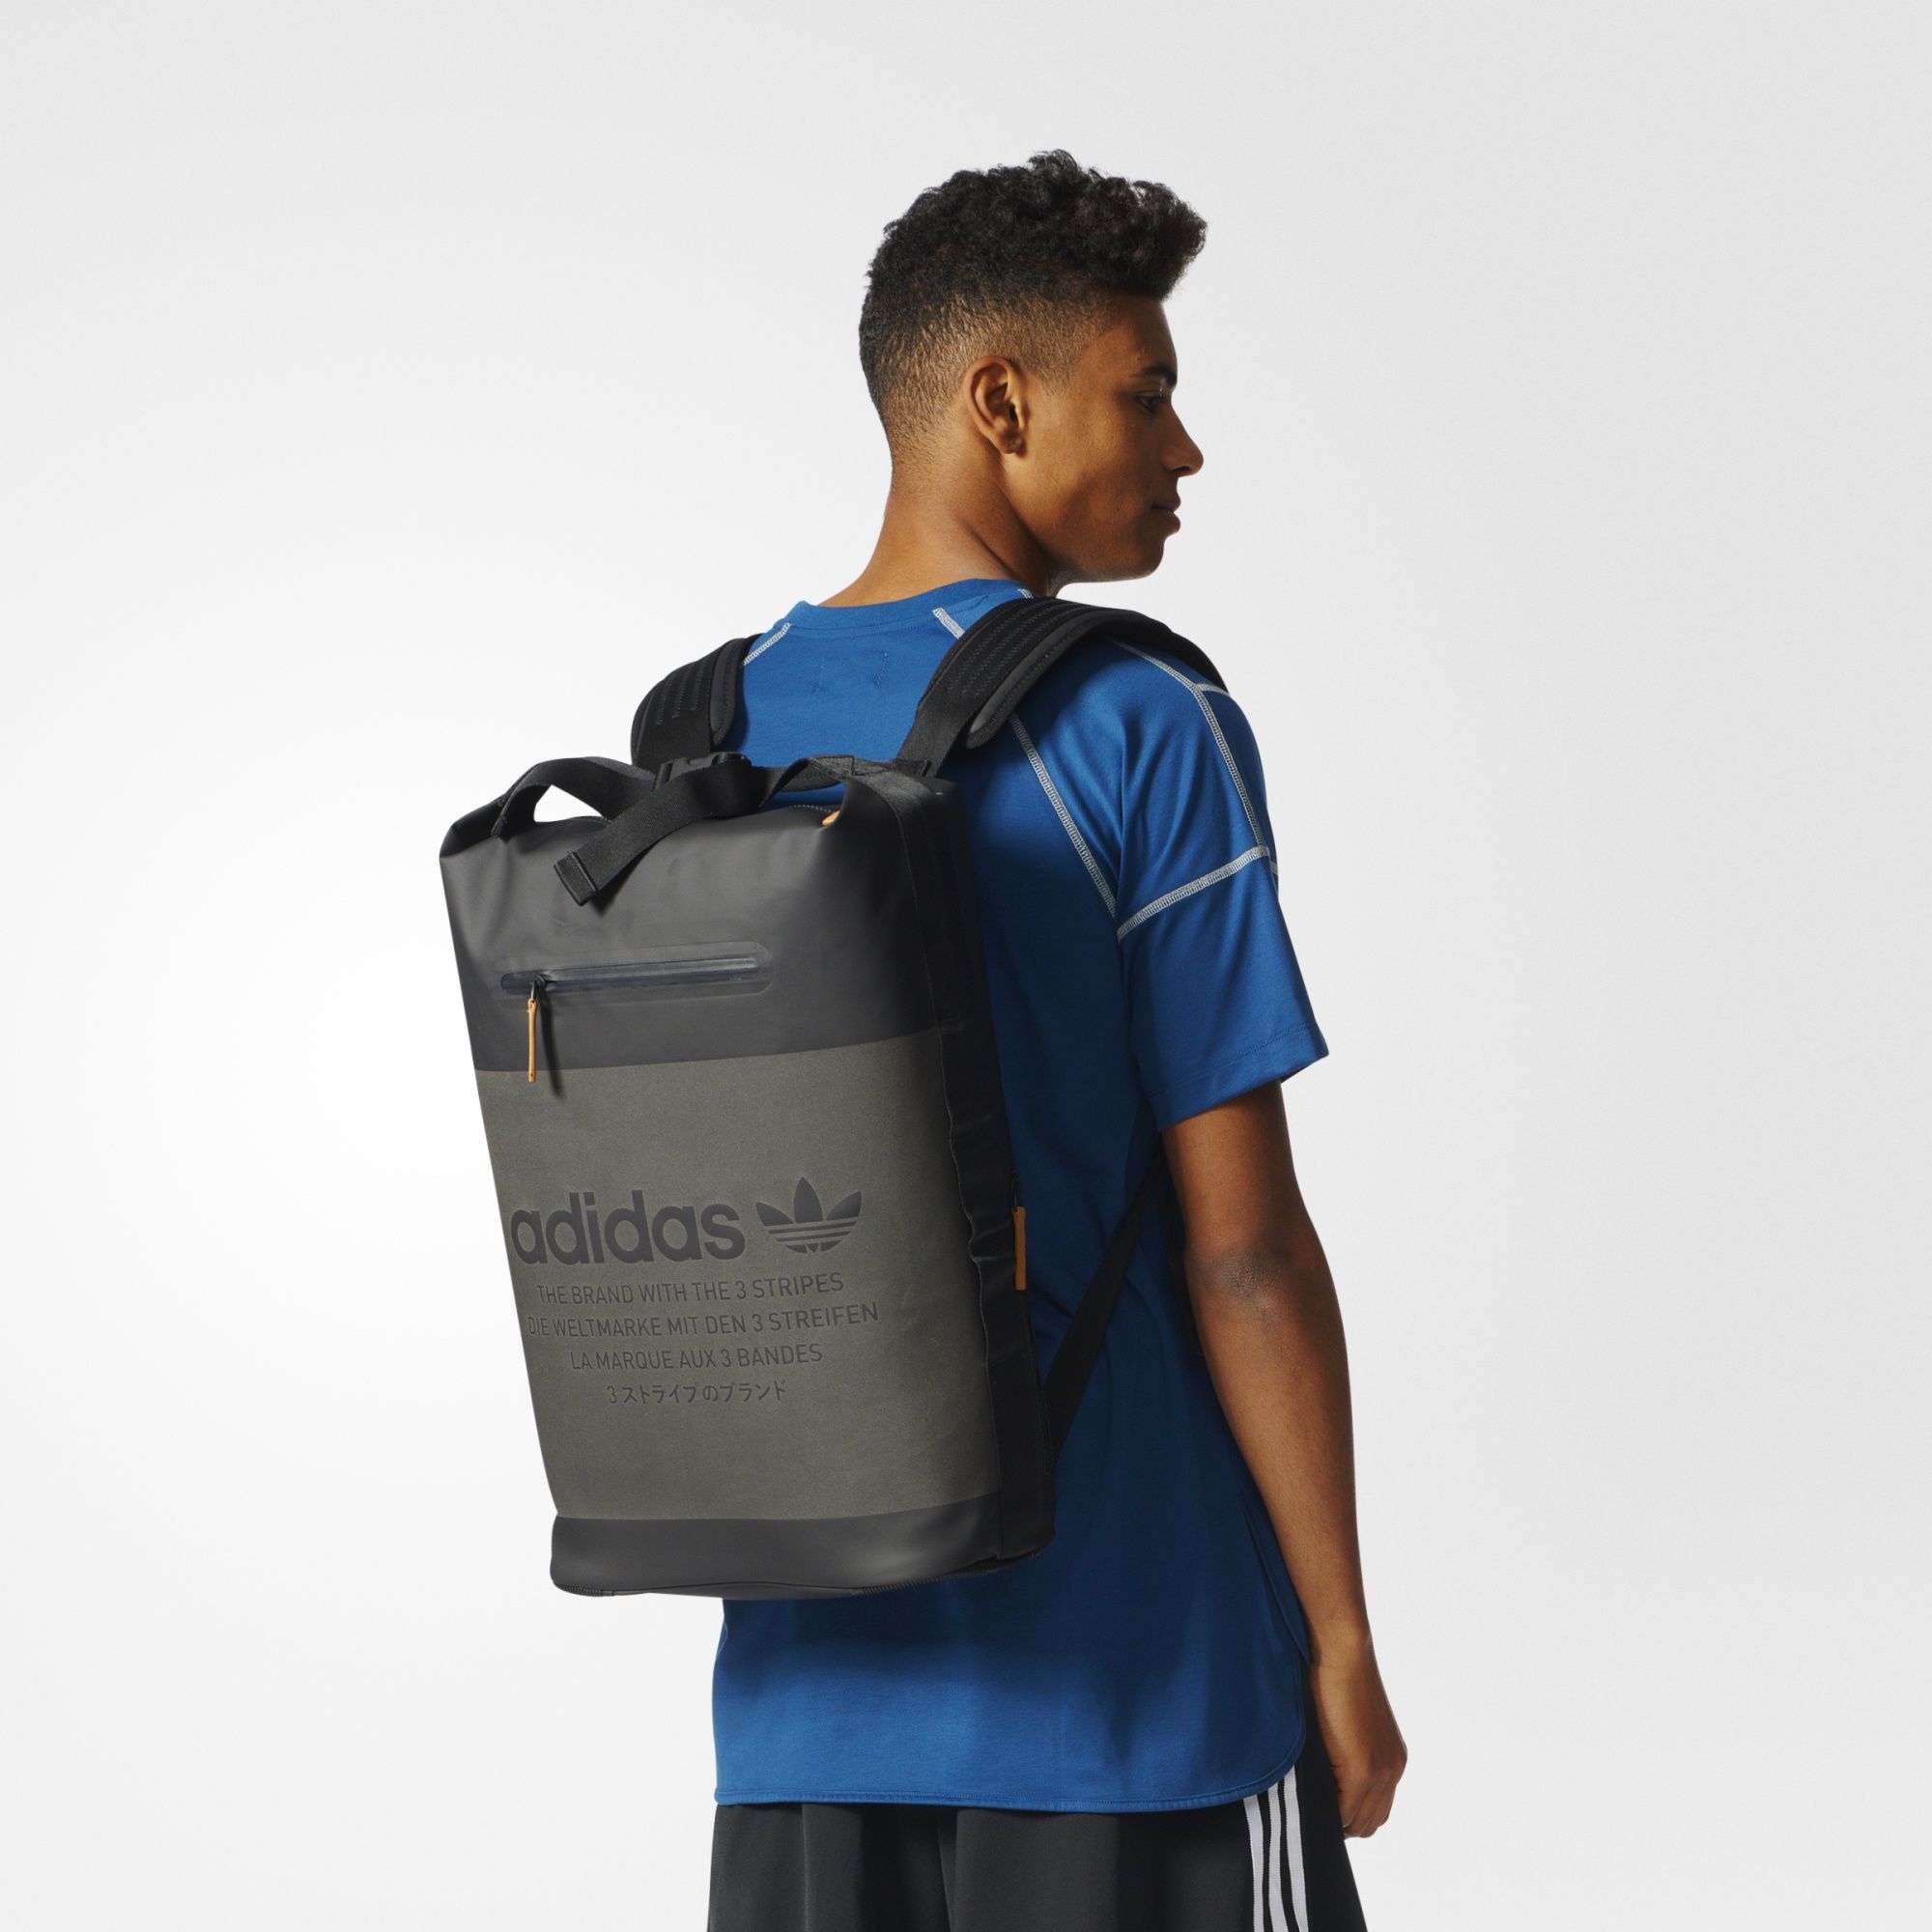 adidas alerts on X: "Now on #adidas US. adidas NMD Bags and Luggage. —&gt; https://t.co/5OQYjCalnk https://t.co/z27AHPtd63" / X